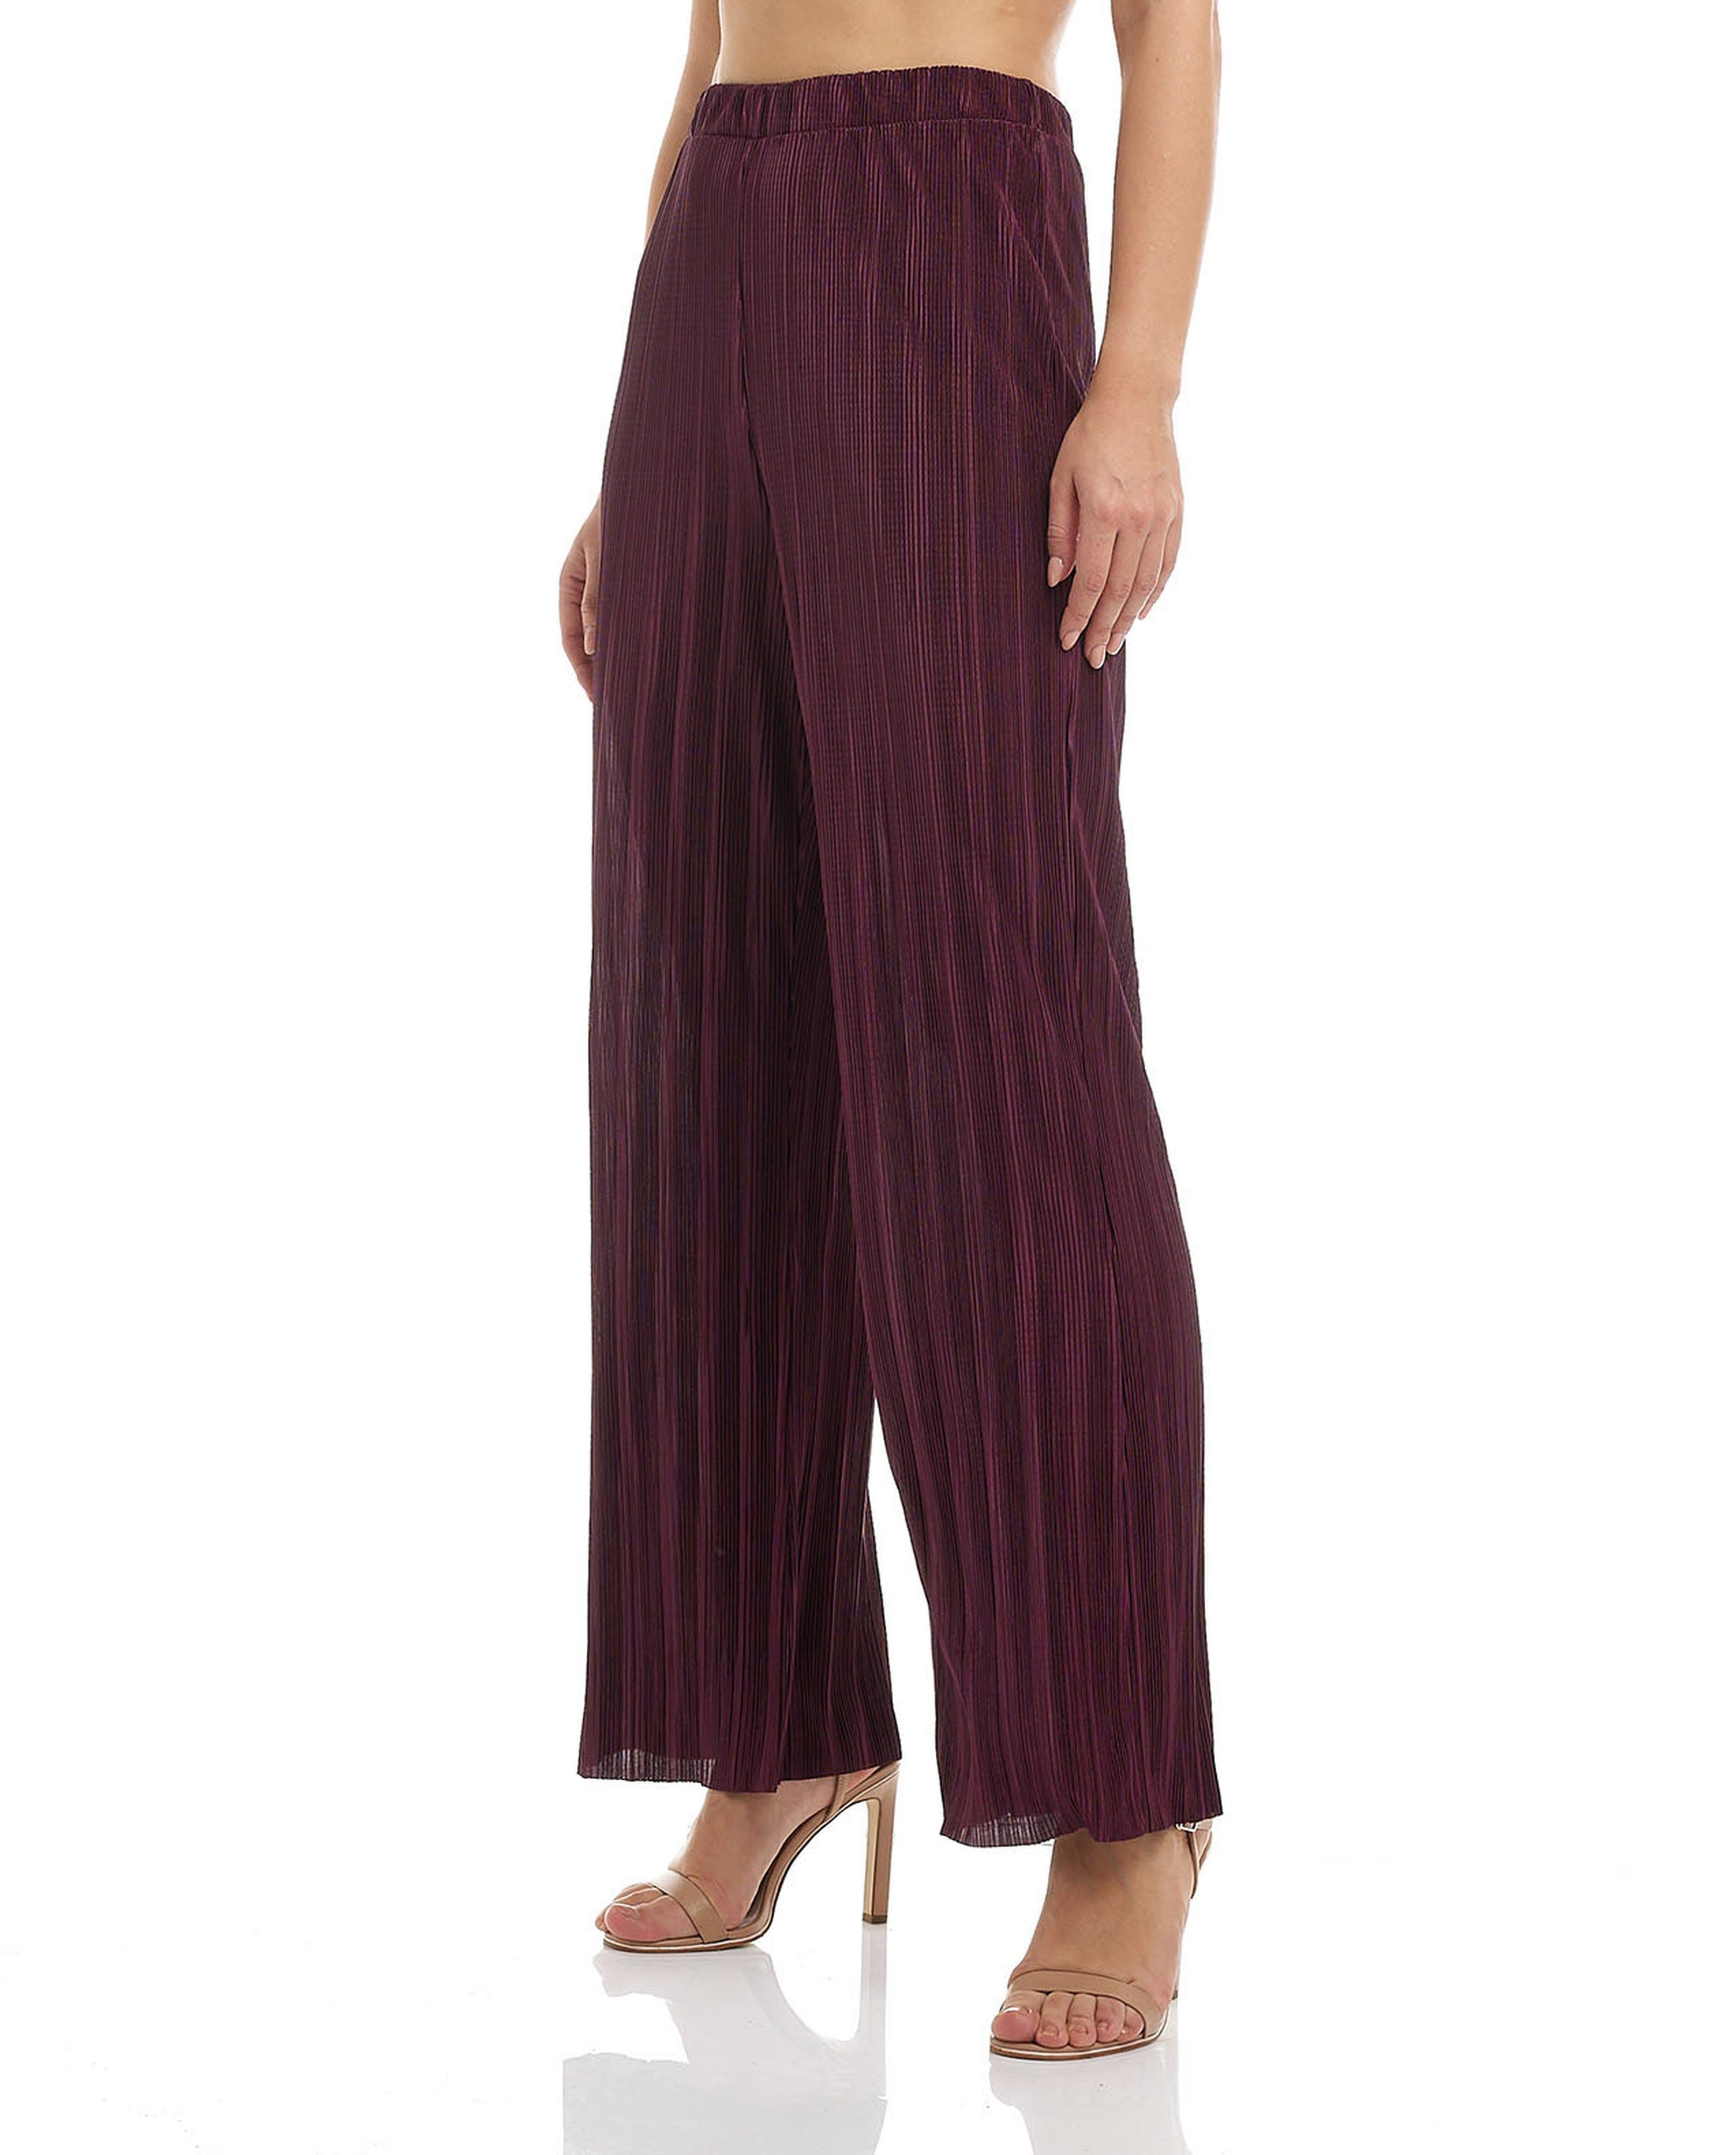 Solid Parallel Pants with Elastic Waist